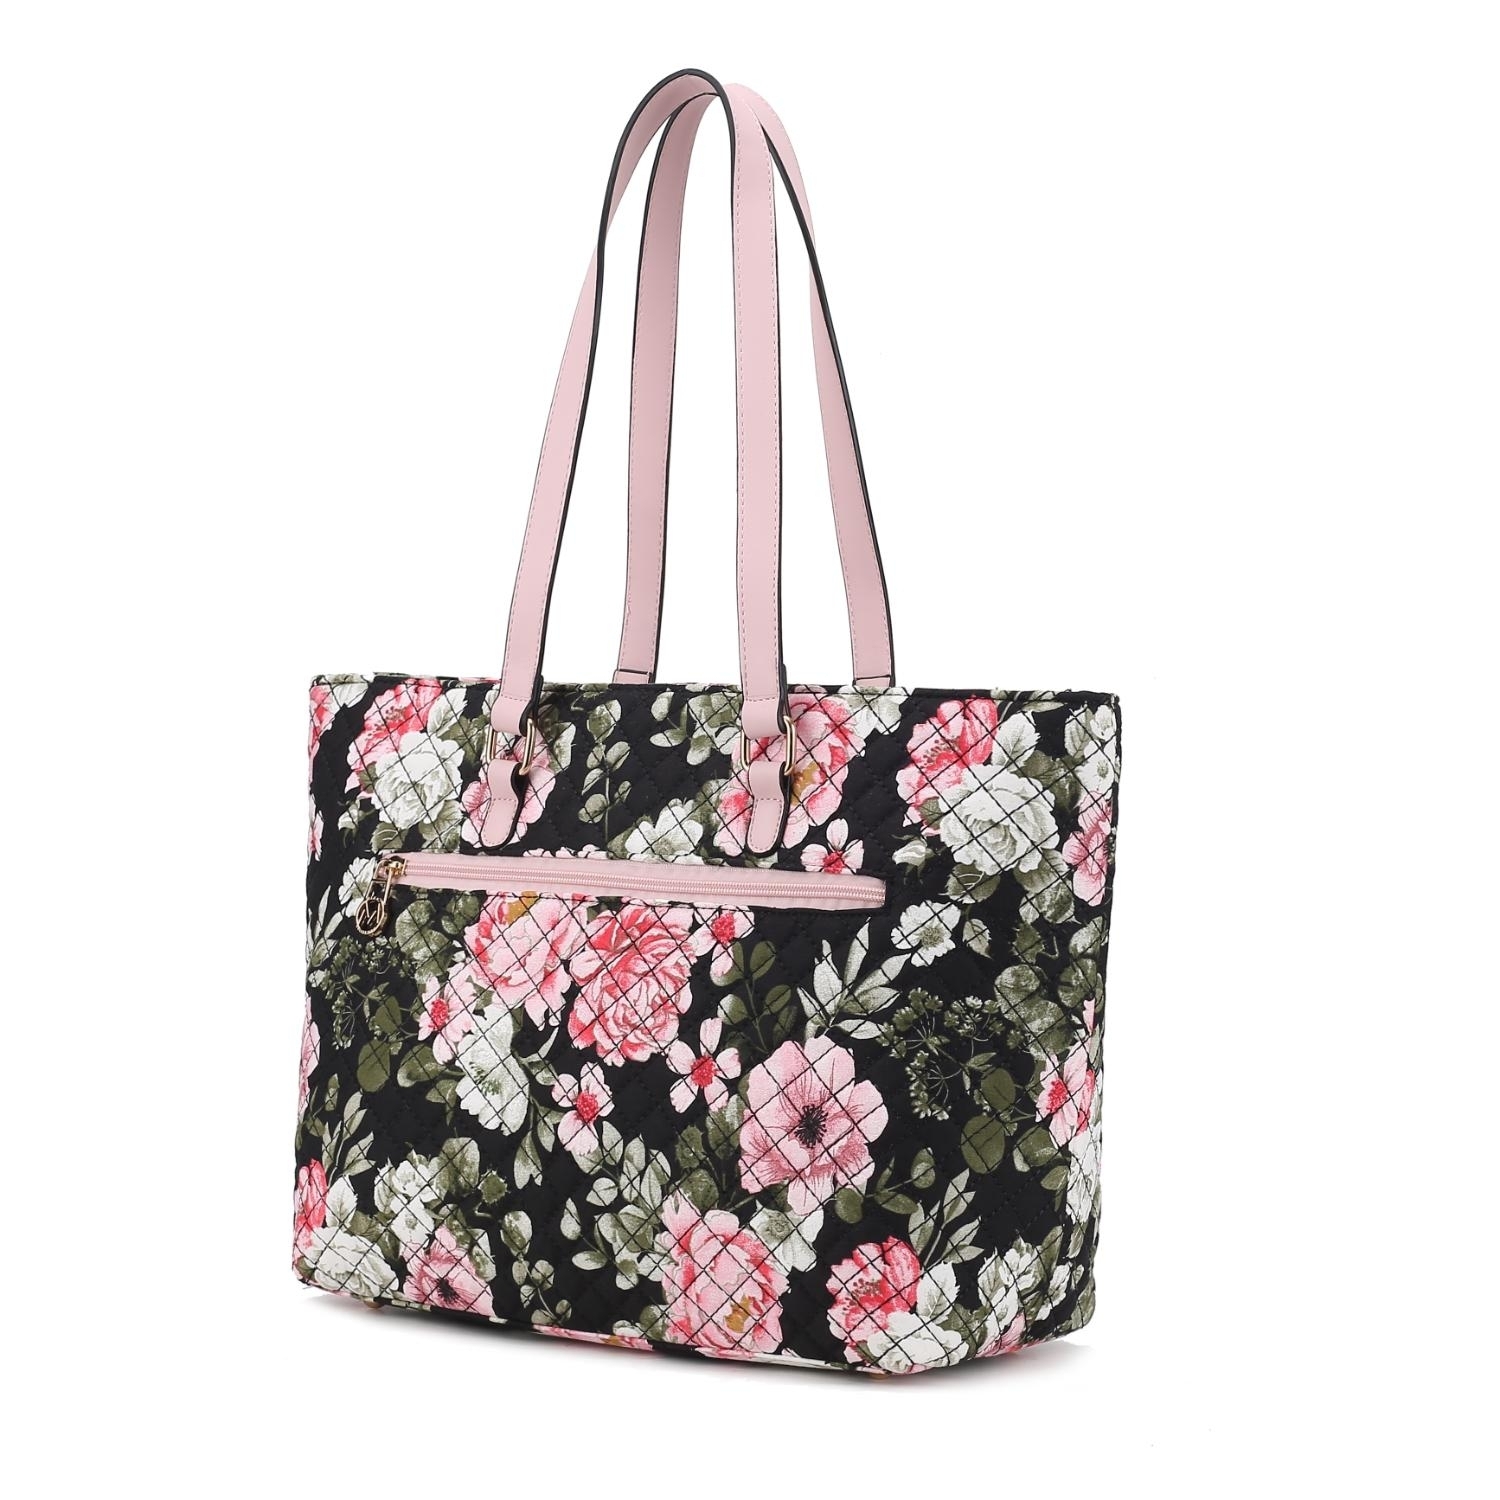 MKF Collection Hallie Quilted Cotton Botanical Pattern Women's Tote Bag By Mia K - Black